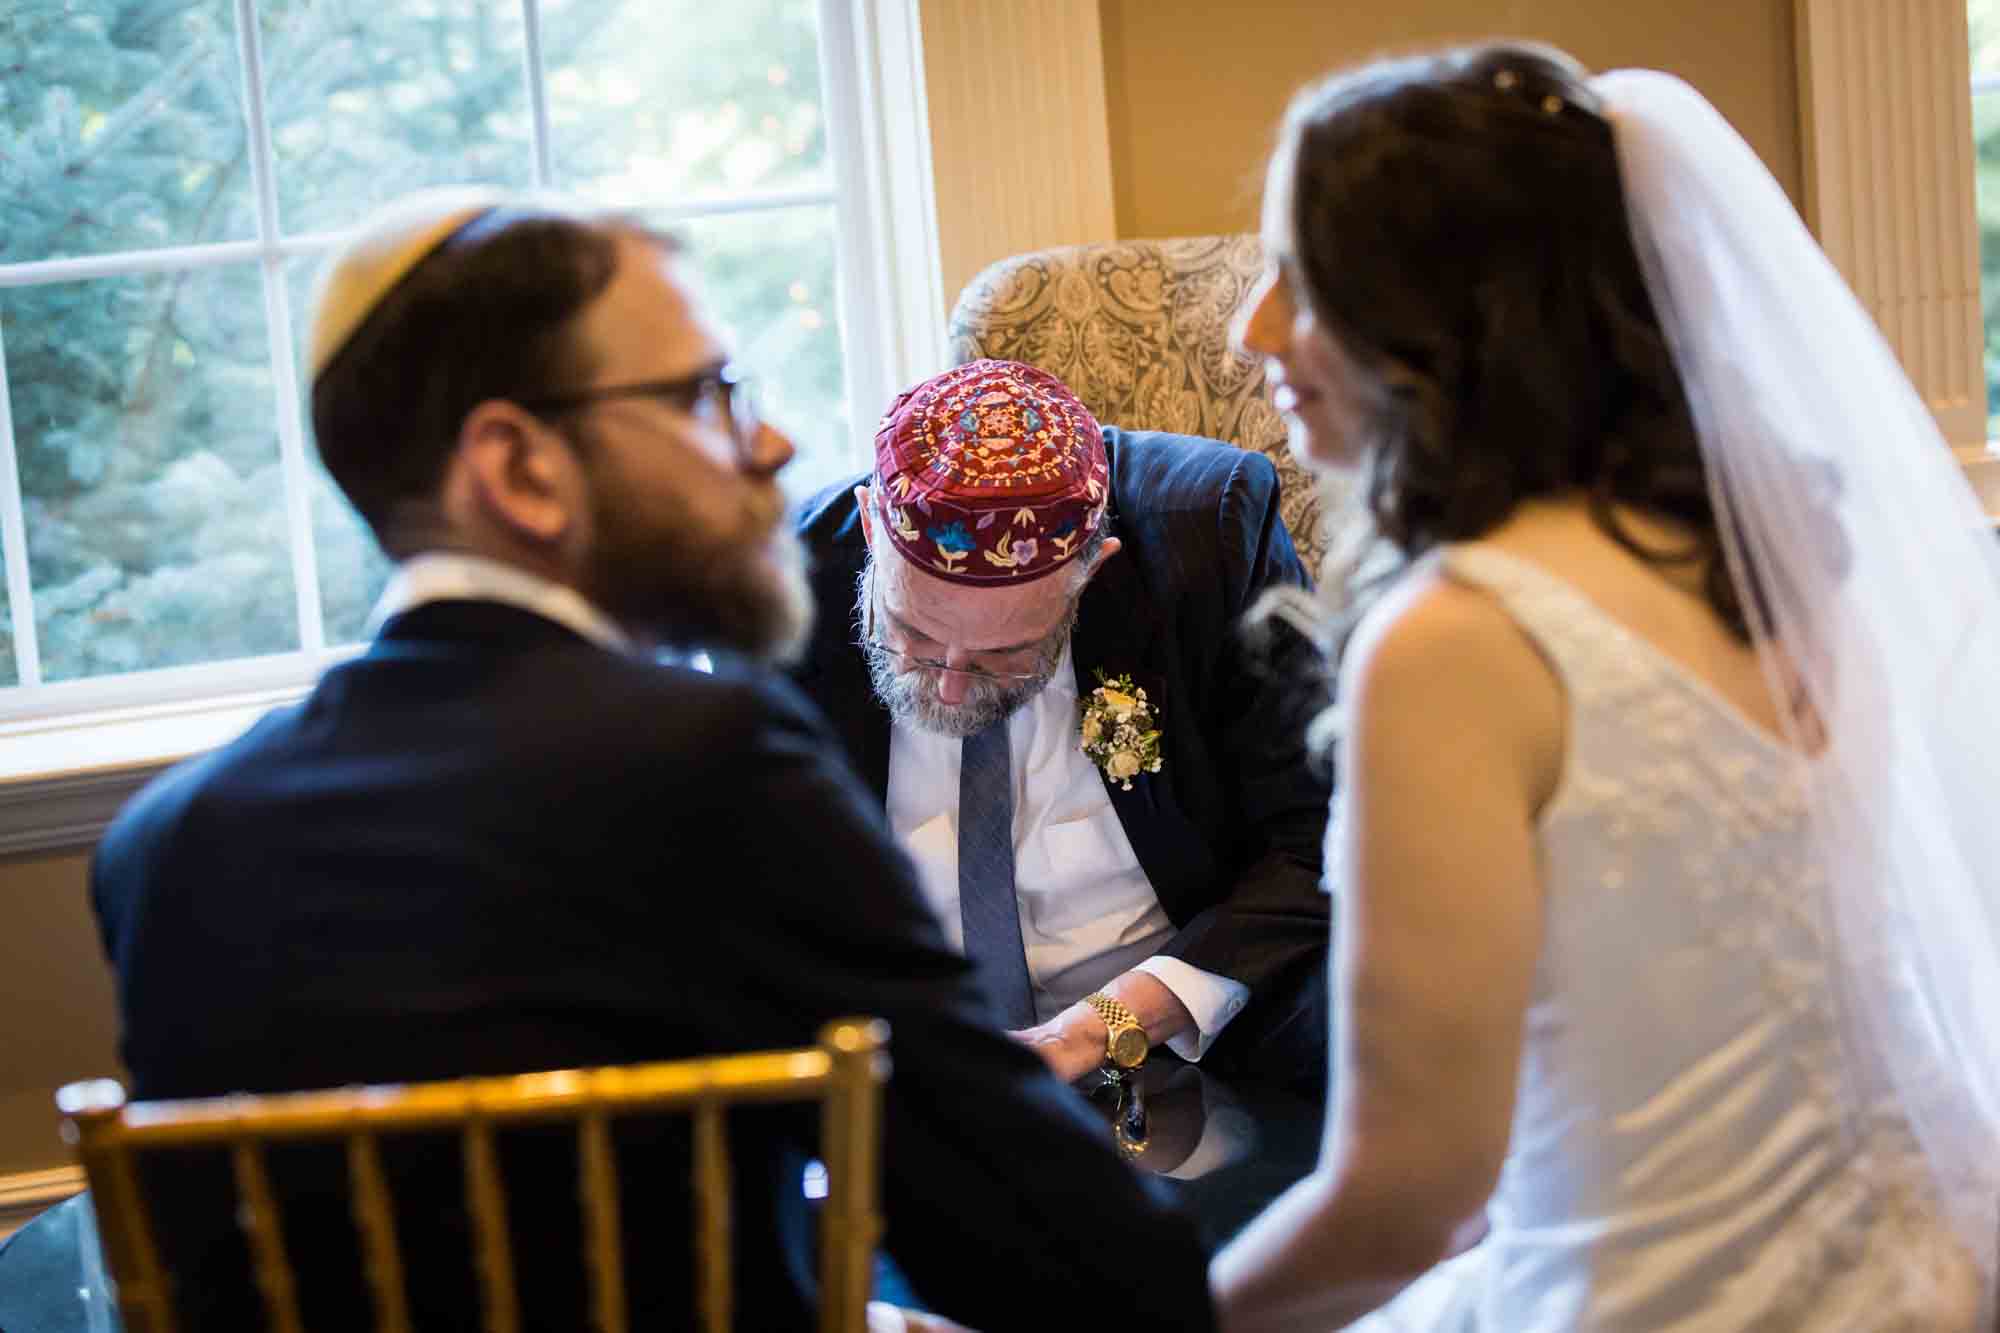 Bride and groom at ketubah signing for an article on band vs DJ